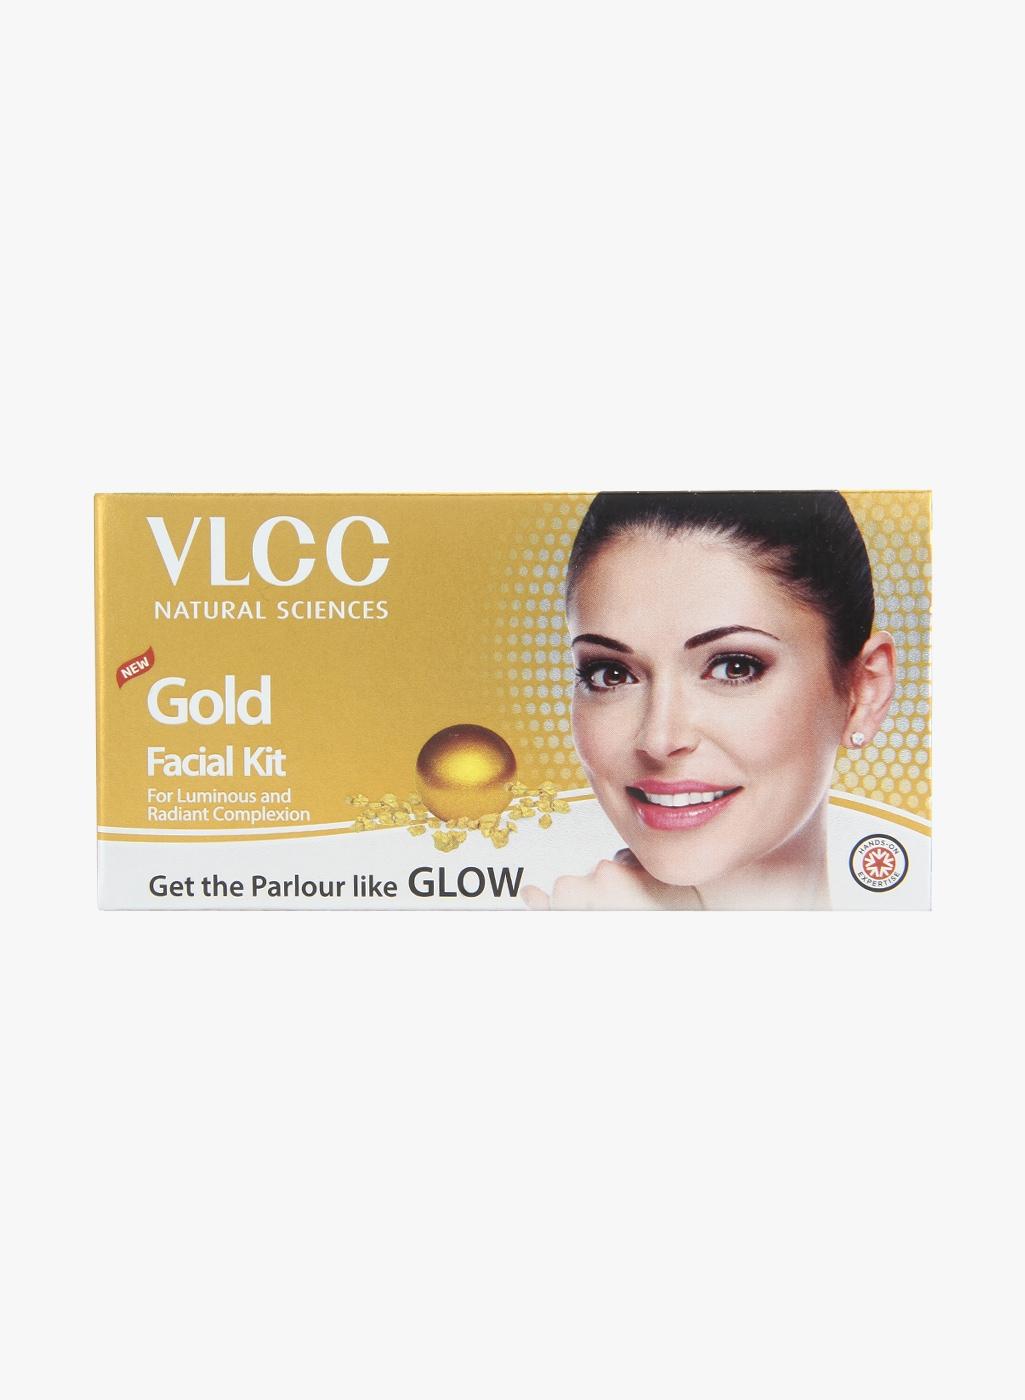 VLCC Gold Facial Kit for Luminous & Radiant Complexion